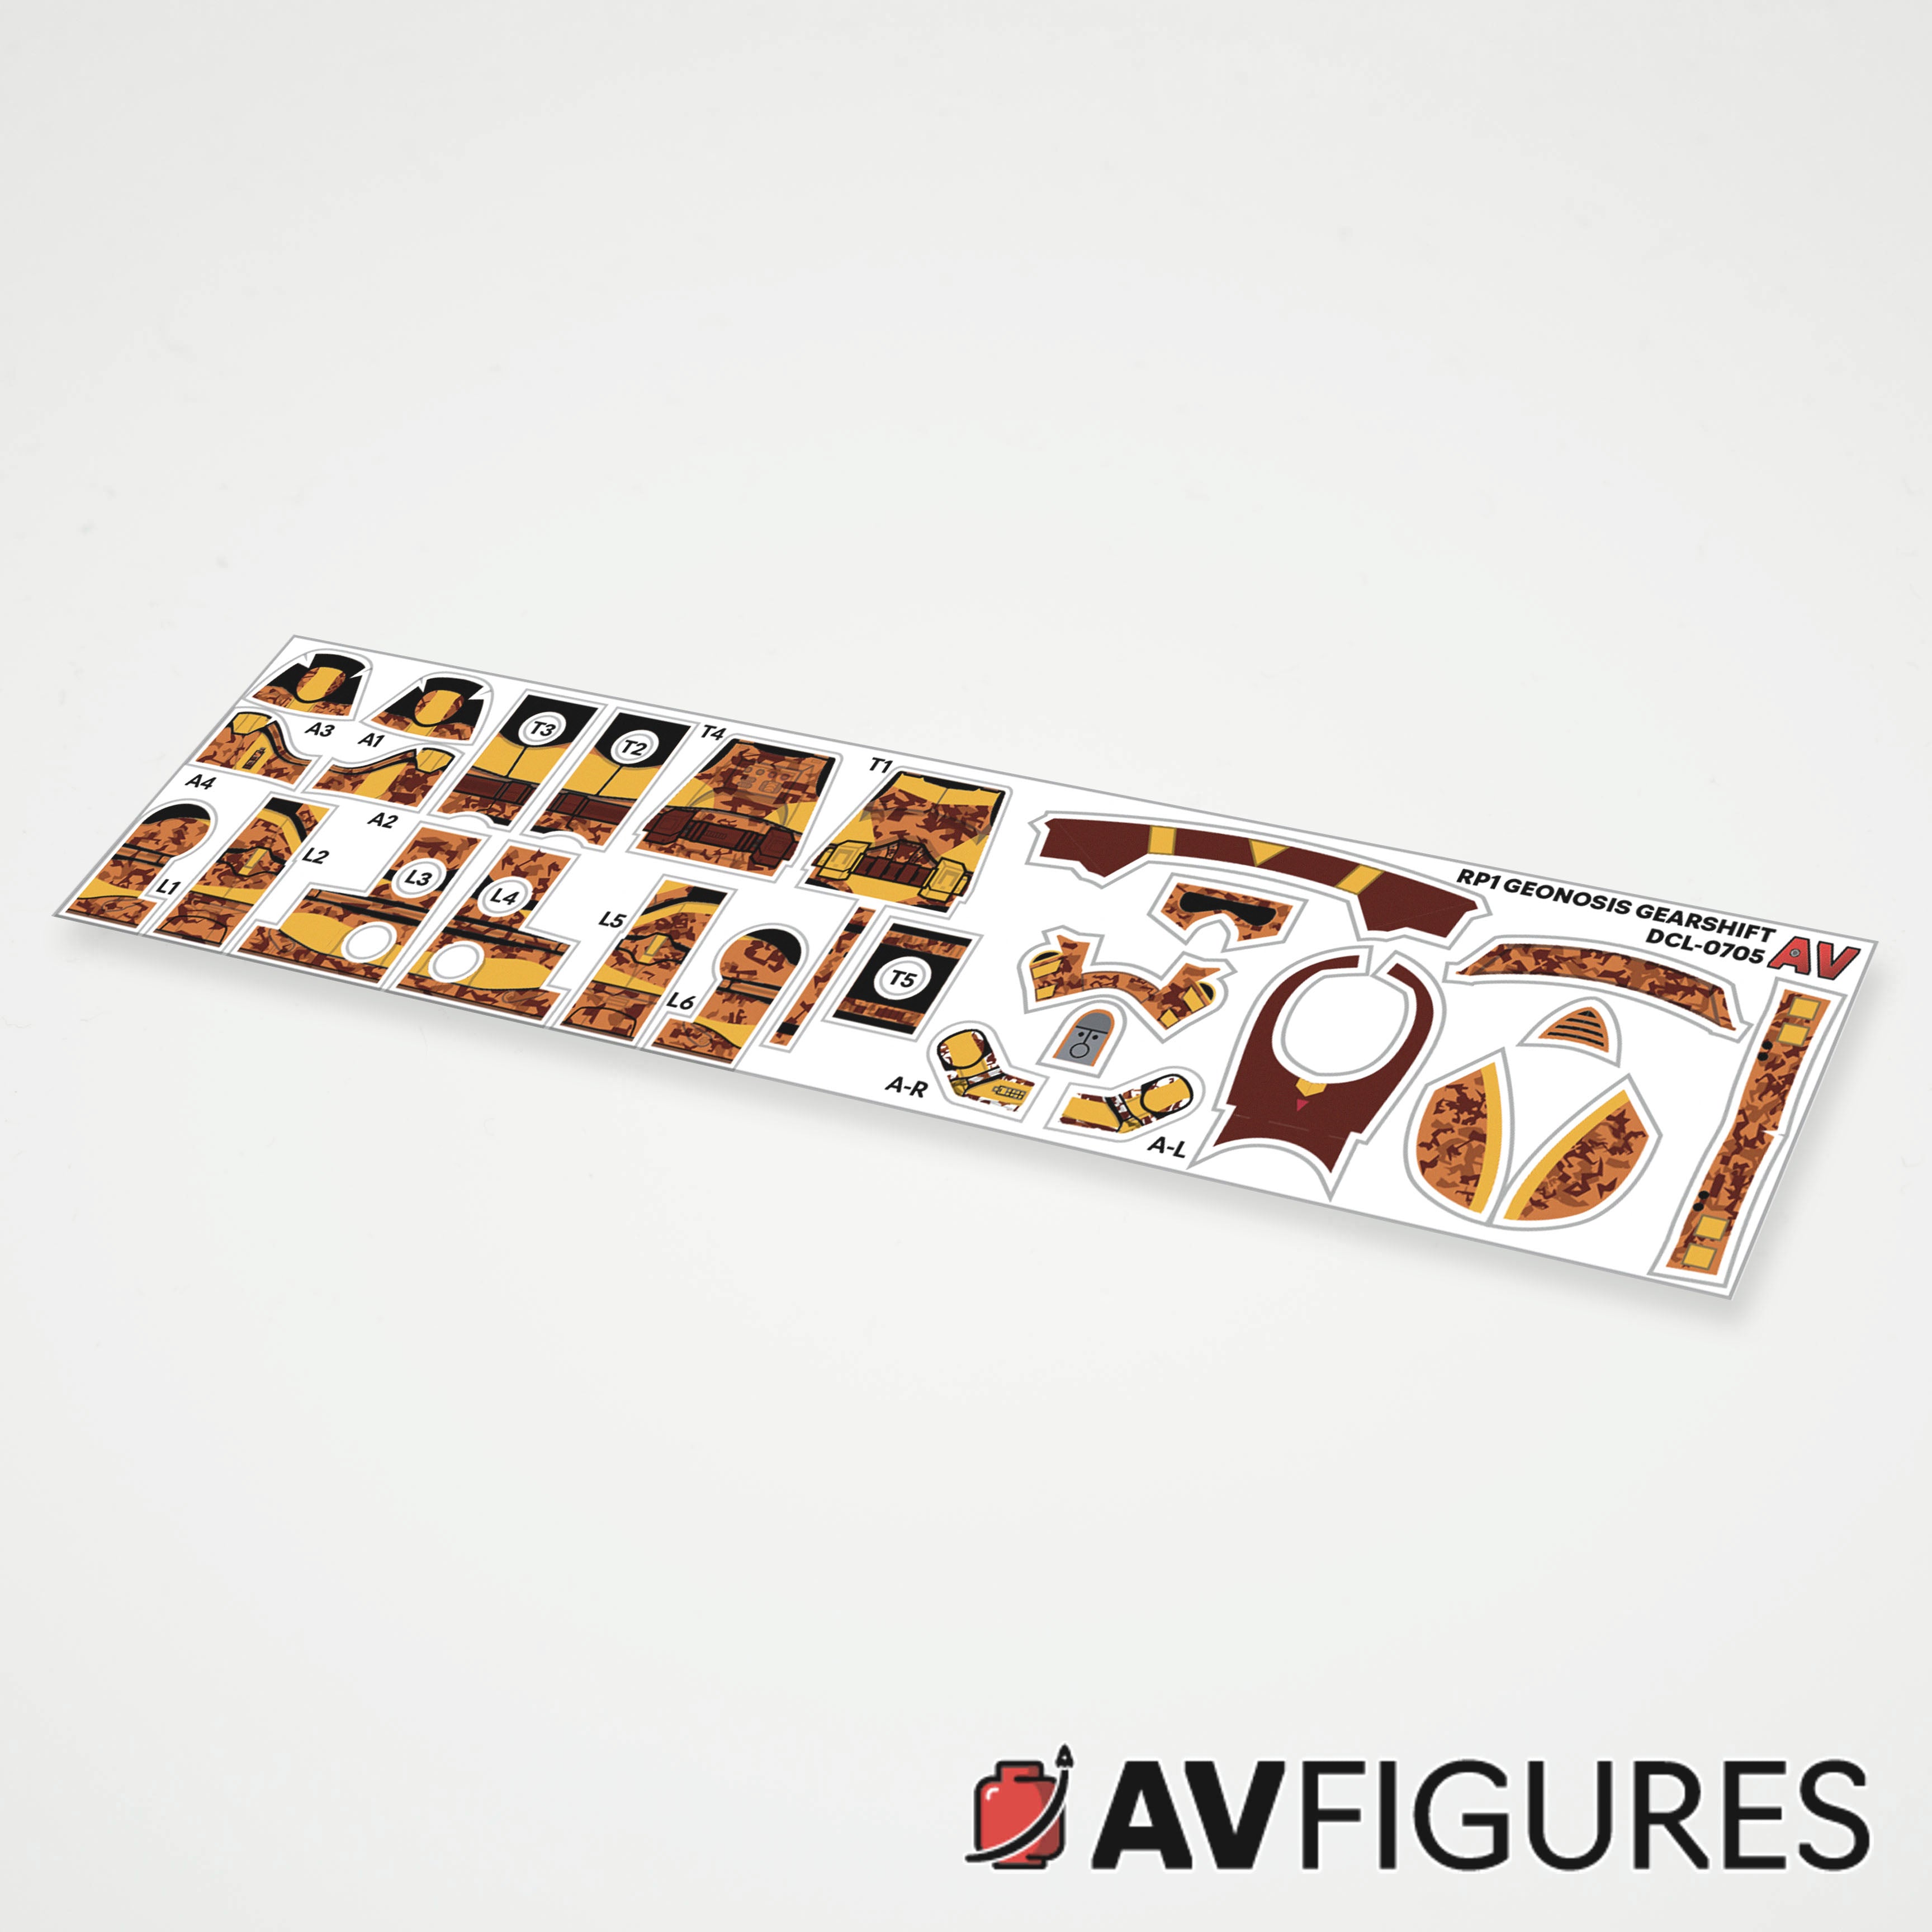 Phase 1 Geonosis 212th ARF Gearshift Decals